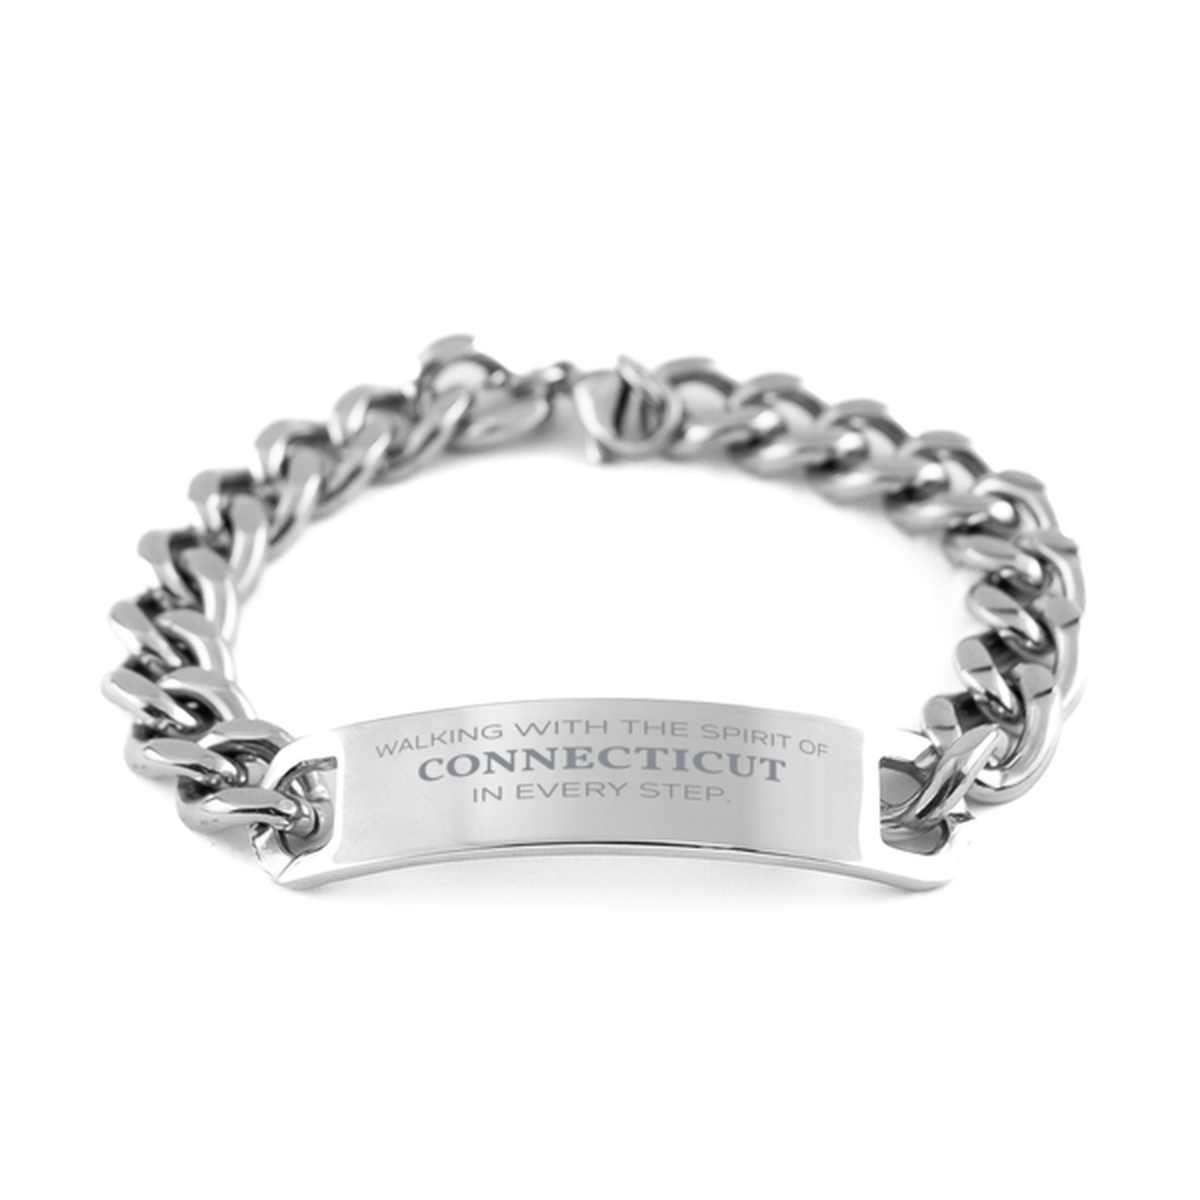 Connecticut Gifts, Walking with the spirit, Love Connecticut Birthday Christmas Cuban Chain Stainless Steel Bracelet For Connecticut People, Men, Women, Friends